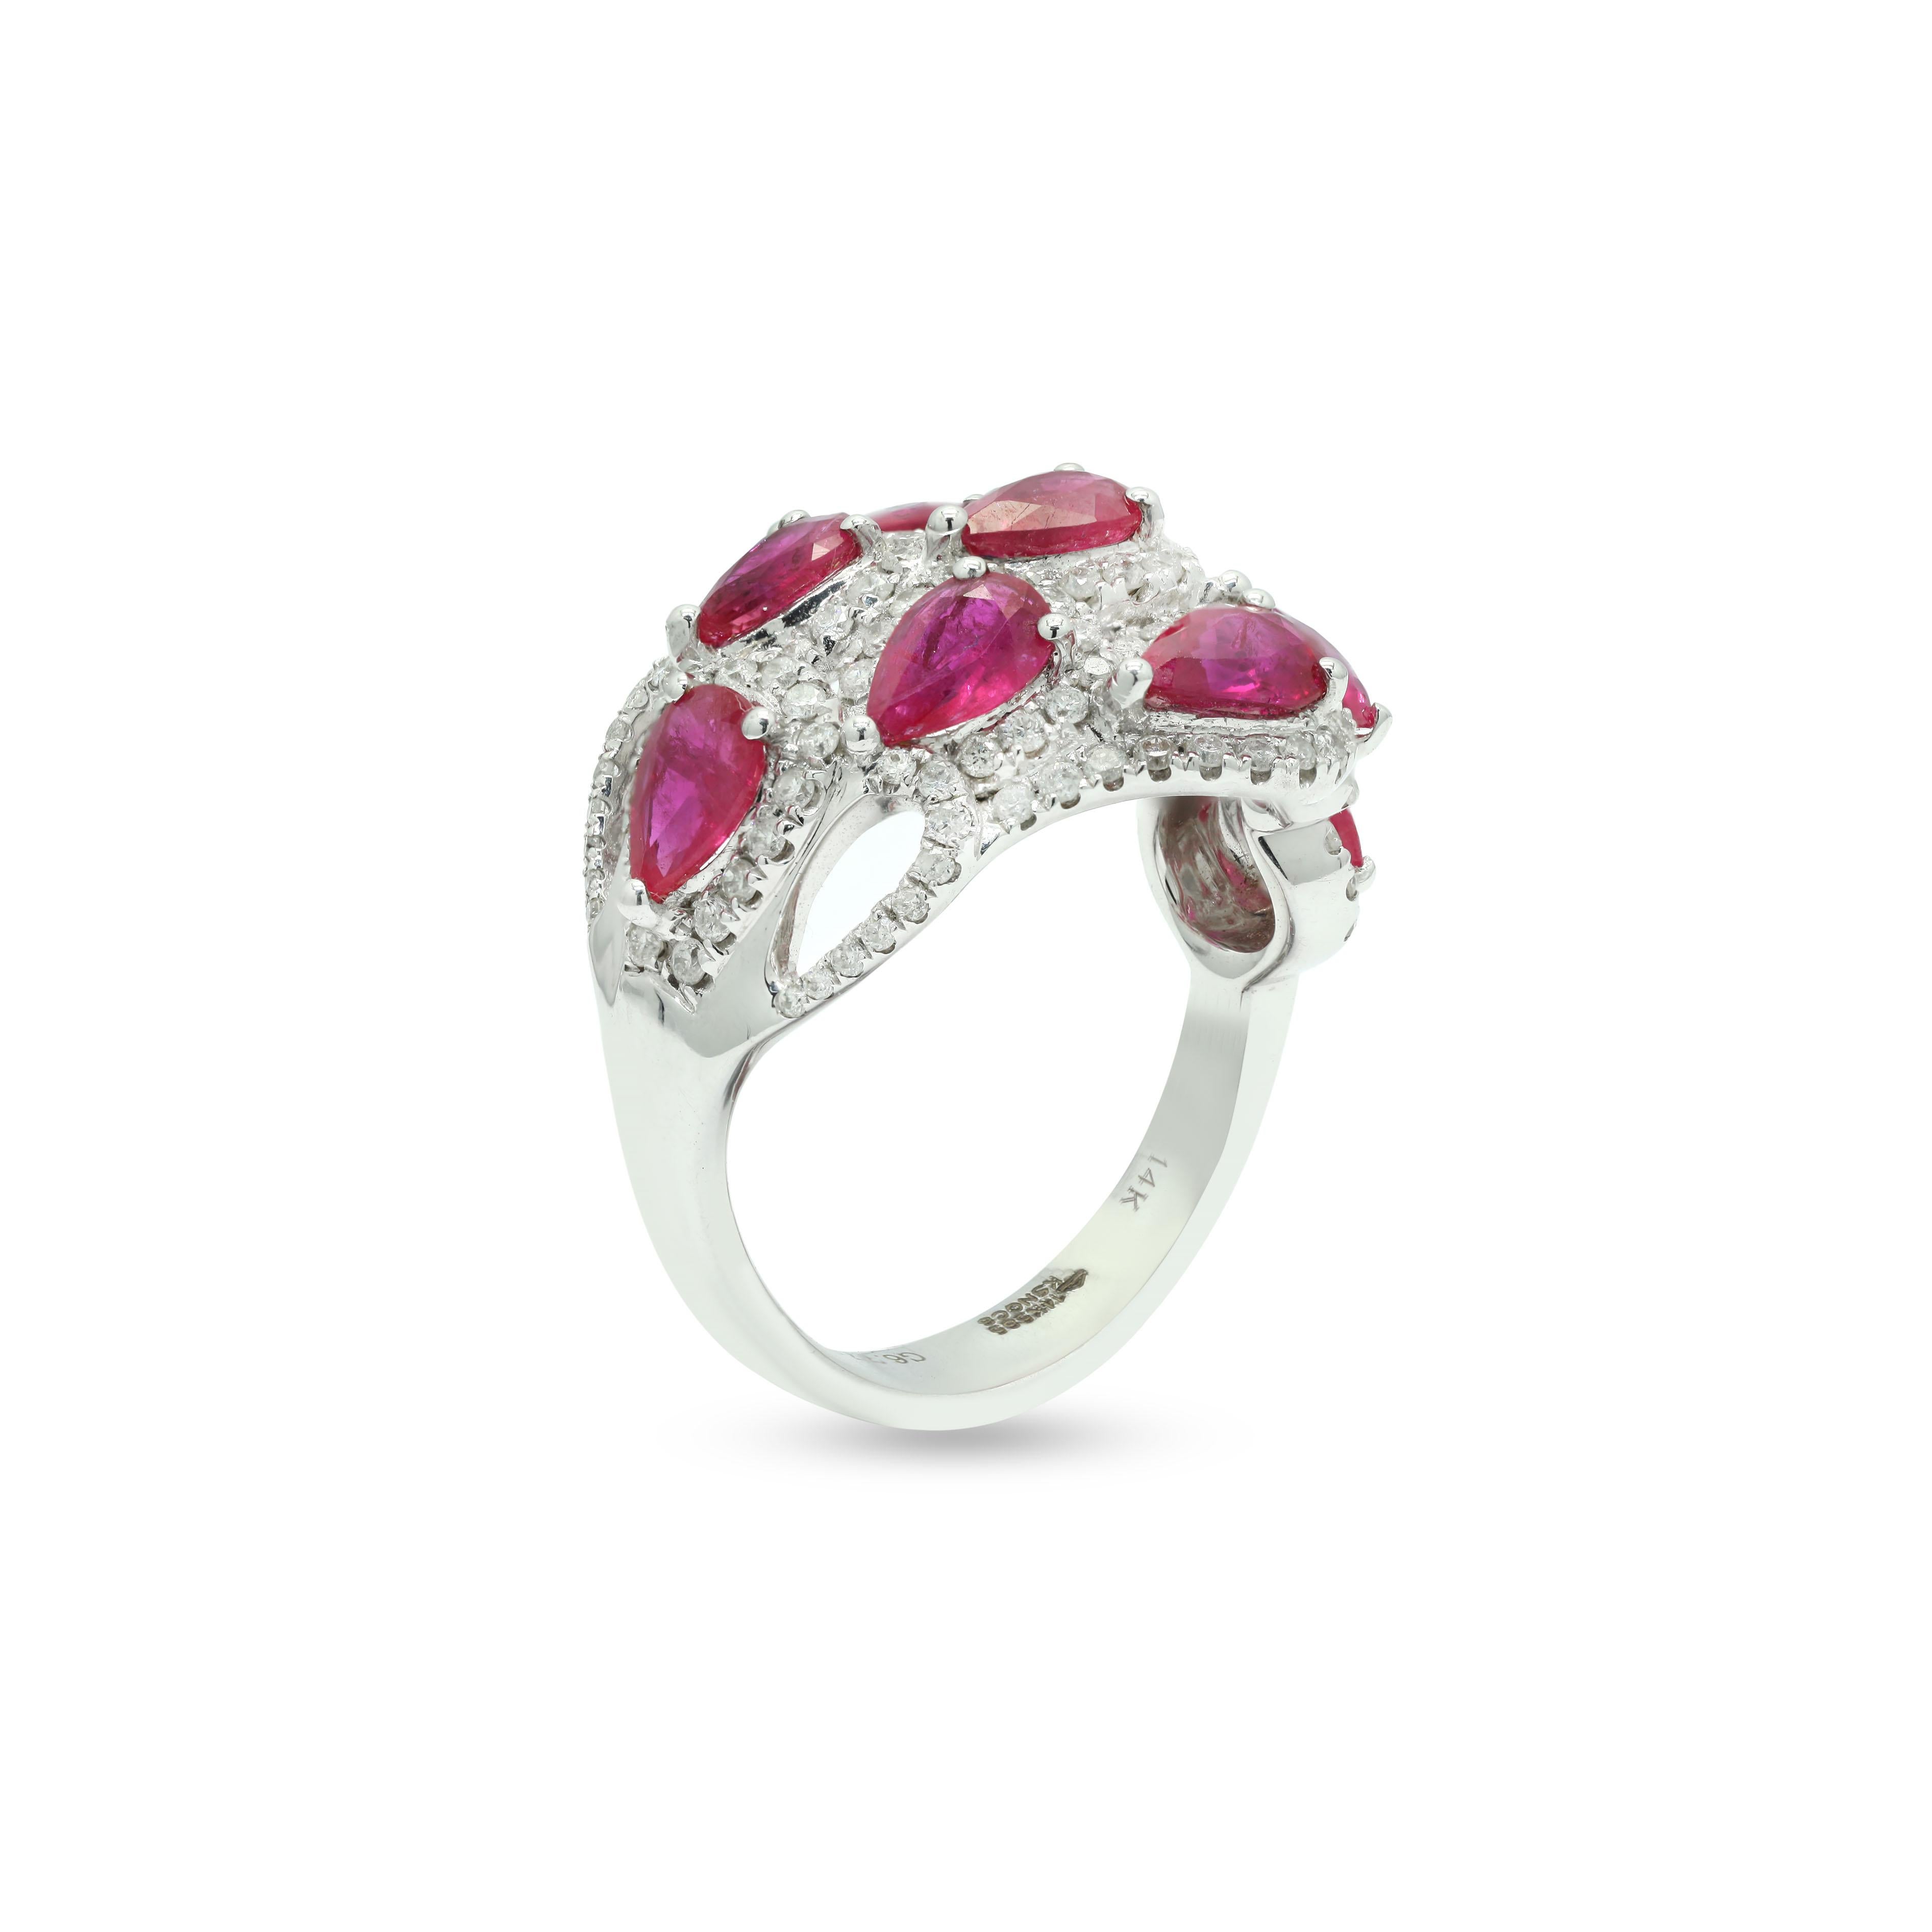 For Sale:  2.01 Carat Ruby and Diamond Cocktail Ring in 18K White Gold  6